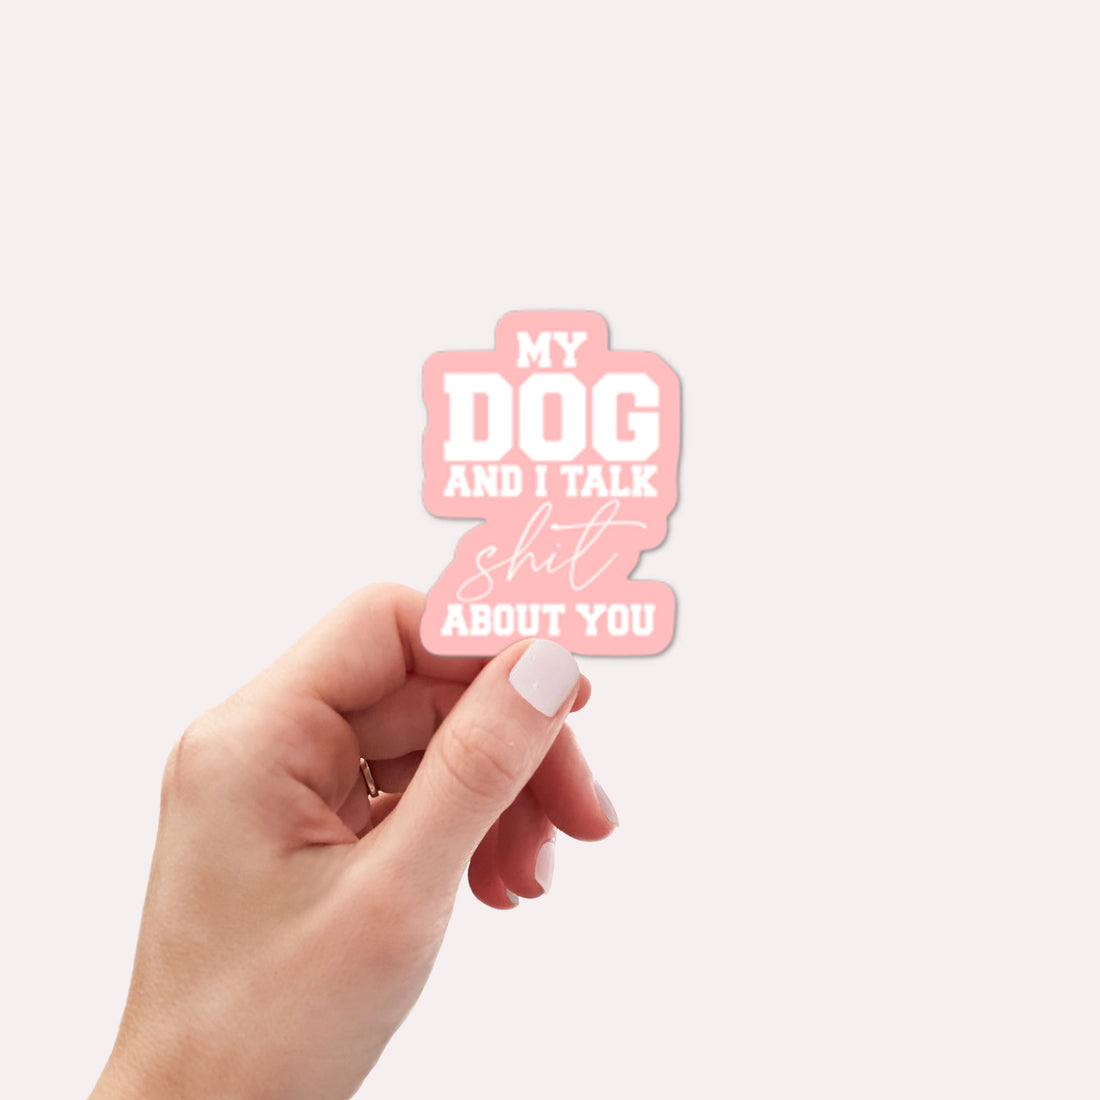 MY dog and I talk shit about you Vinyl Sticker